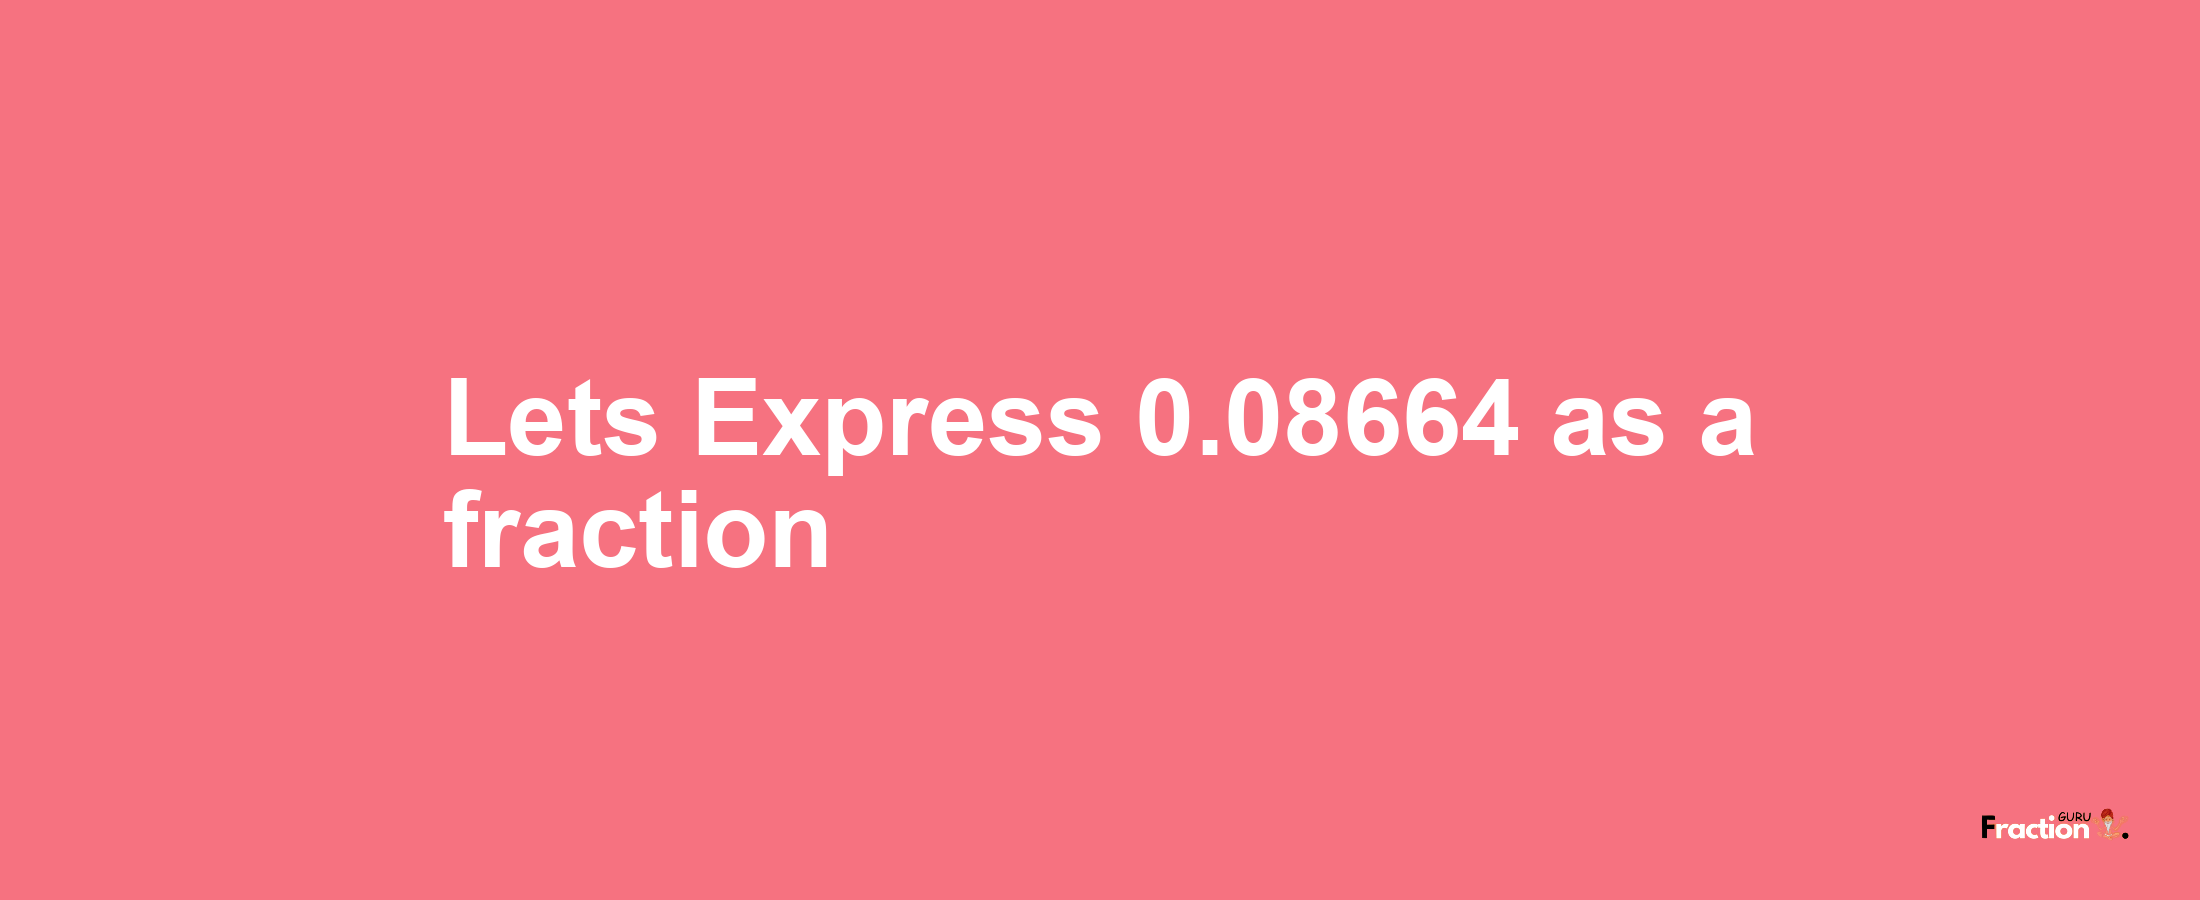 Lets Express 0.08664 as afraction